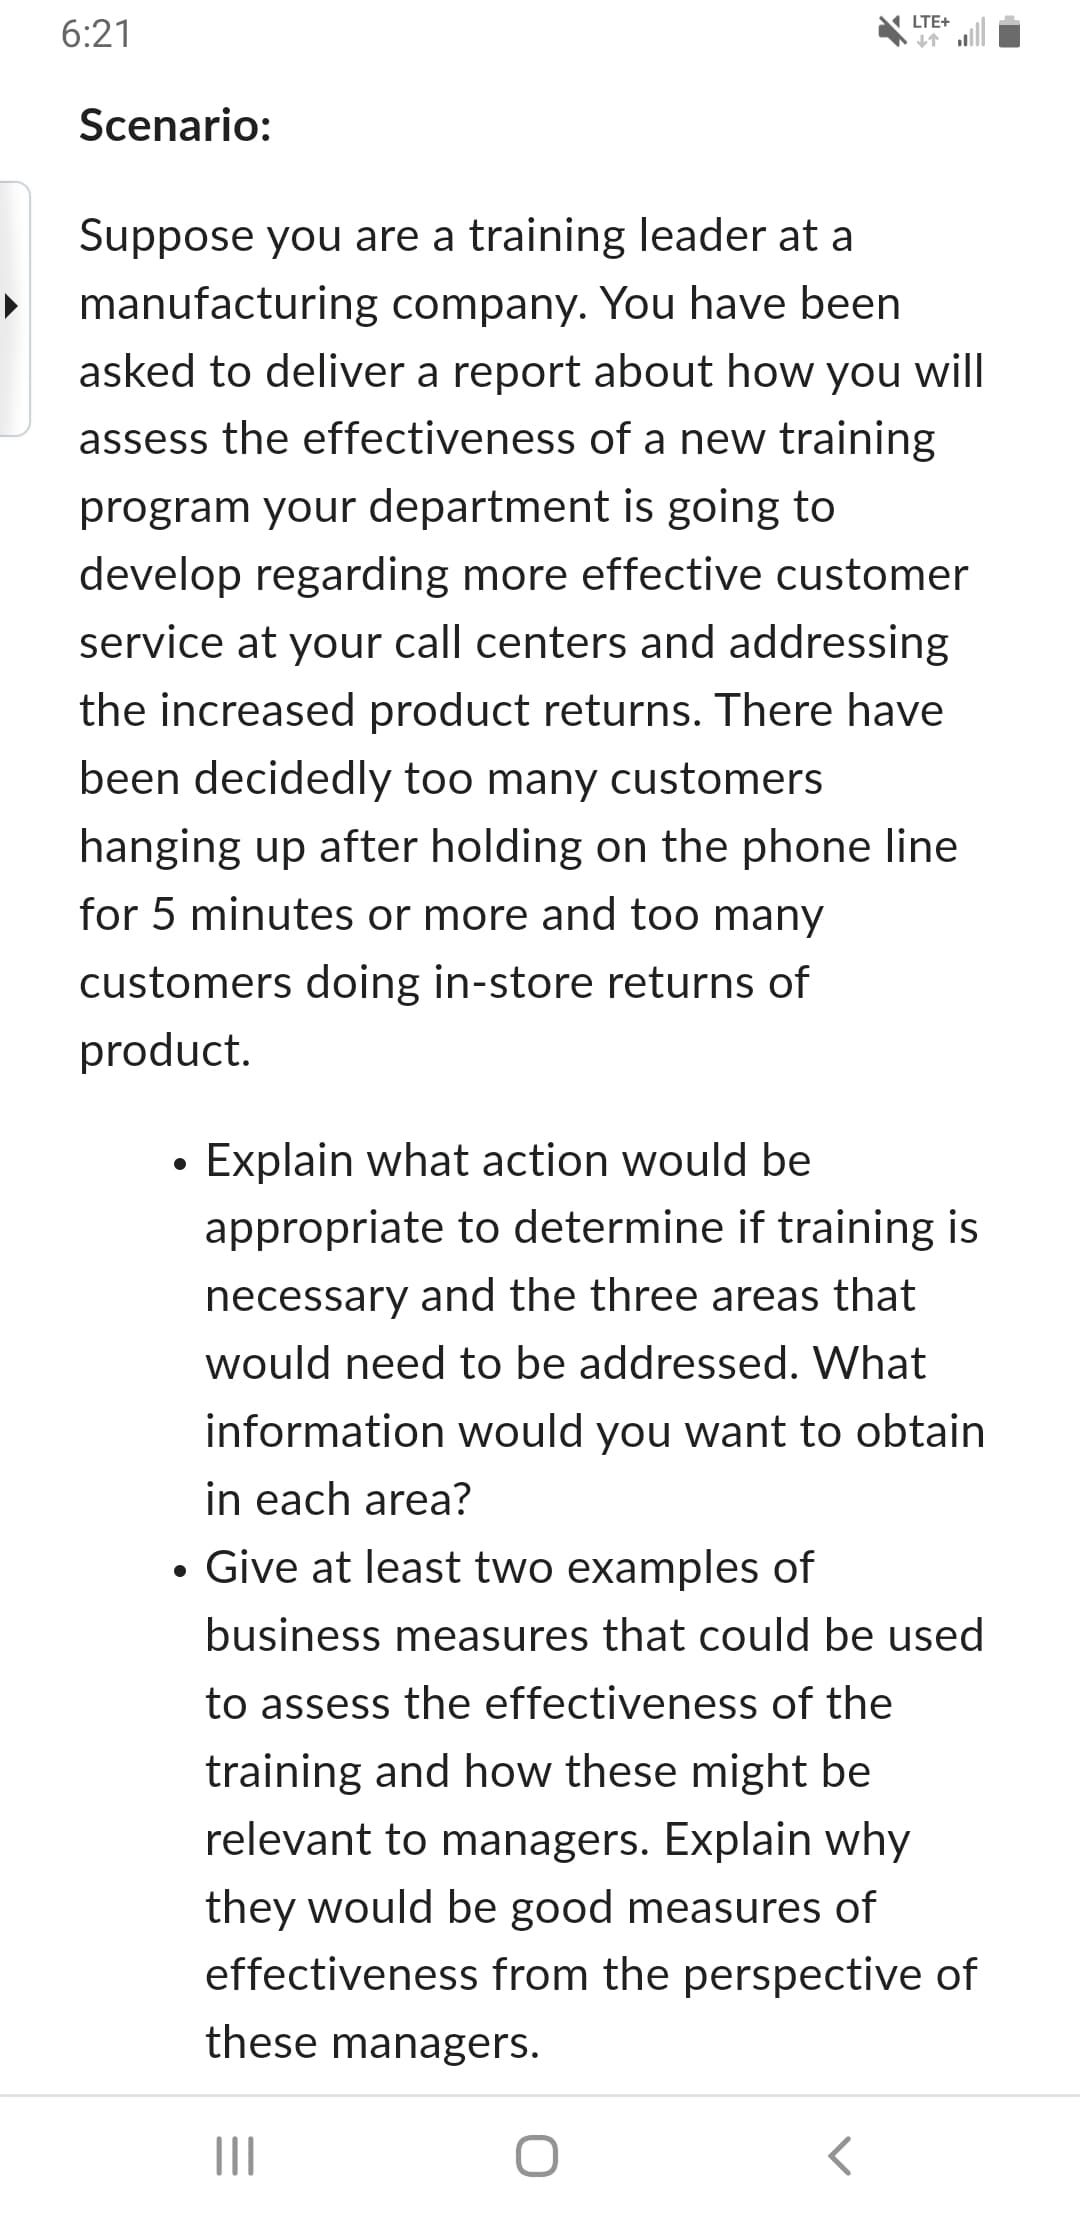 6:21
Scenario:
LTE+
个
Suppose you are a training leader at a
manufacturing company. You have been
asked to deliver a report about how you will
assess the effectiveness of a new training
program your department is going to
develop regarding more effective customer
service at your call centers and addressing
the increased product returns. There have
been decidedly too many customers
hanging up after holding on the phone line
for 5 minutes or more and too many
customers doing in-store returns of
product.
•
Explain what action would be
appropriate to determine if training is
necessary and the three areas that
would need to be addressed. What
information would you want to obtain
in each area?
• Give at least two examples of
business measures that could be used
to assess the effectiveness of the
training and how these might be
relevant to managers. Explain why
they would be good measures of
effectiveness from the perspective of
these managers.
|||
O